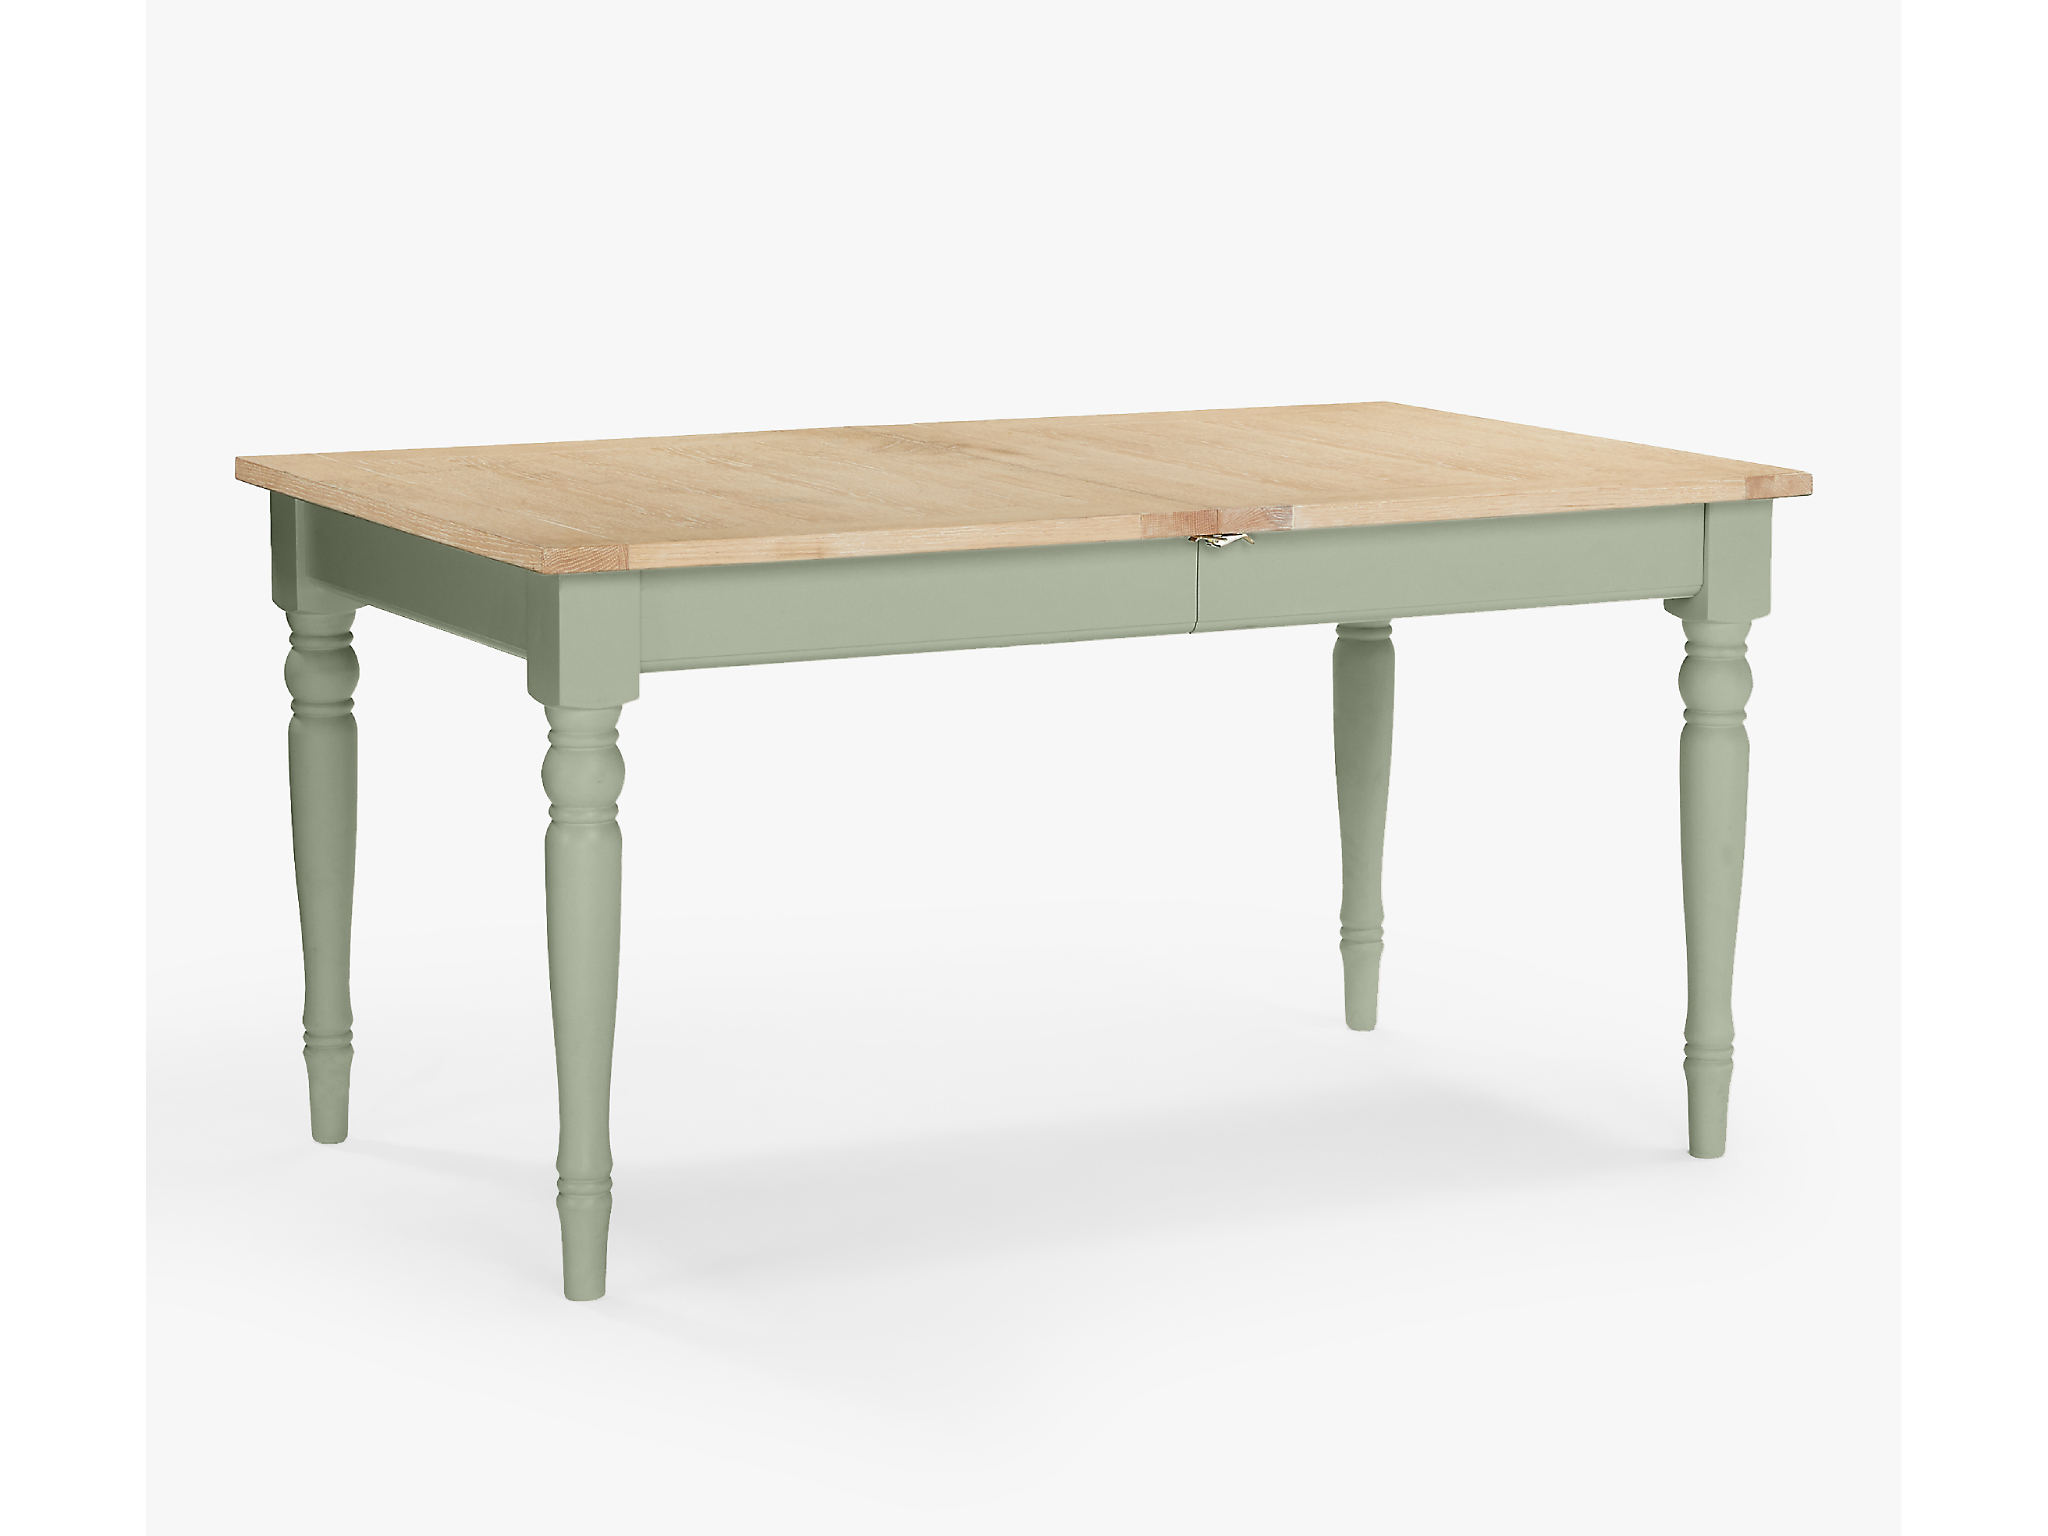 John-Lewis-extendable-dining-table-indybest